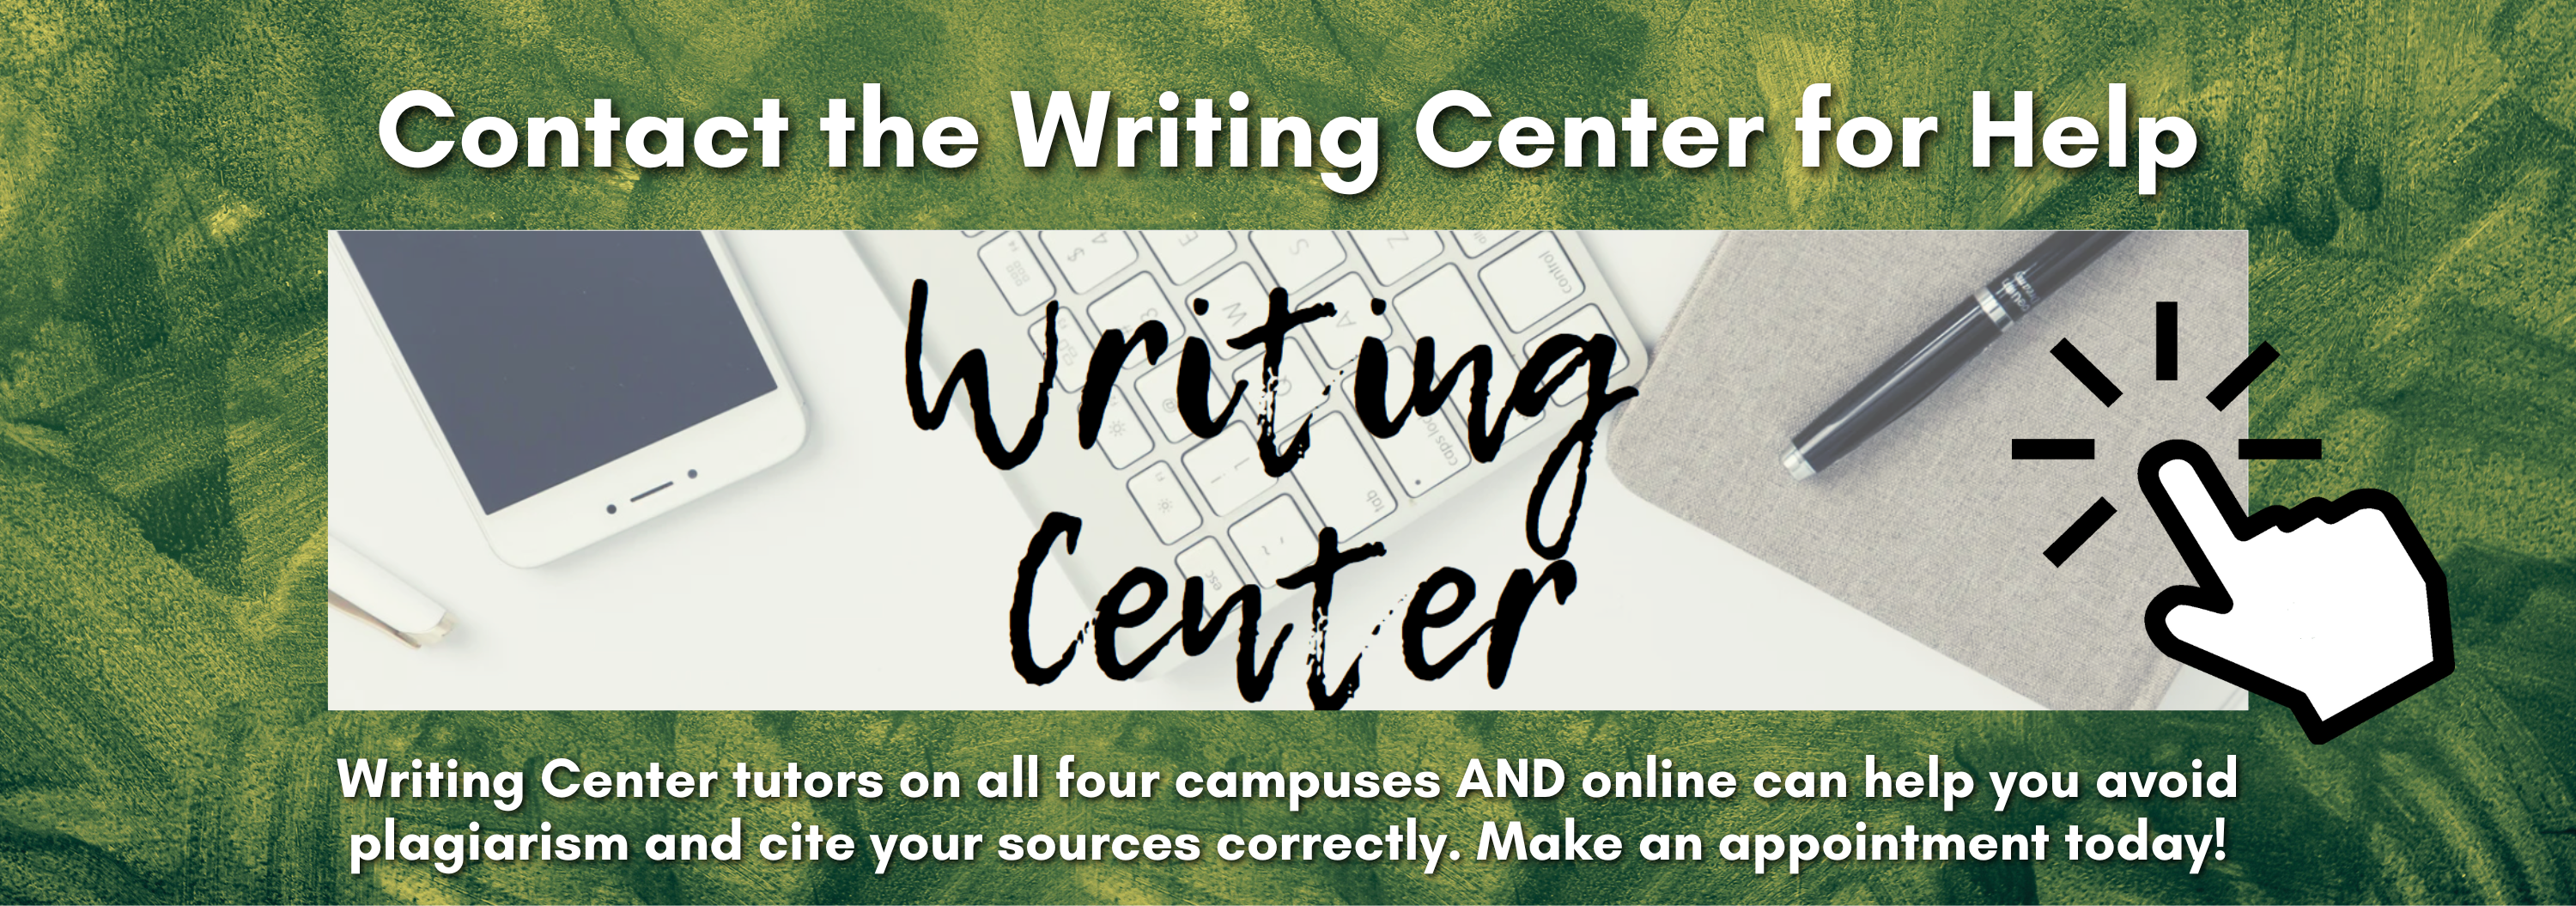 The text "Contact the Writing Center for Help" is above an image of tech device and pens. Beneath the image reads, "Writing Center tutors on all four campuses AND online can help you avoid plagiarism and cite your sources correctly. Make an appointment"